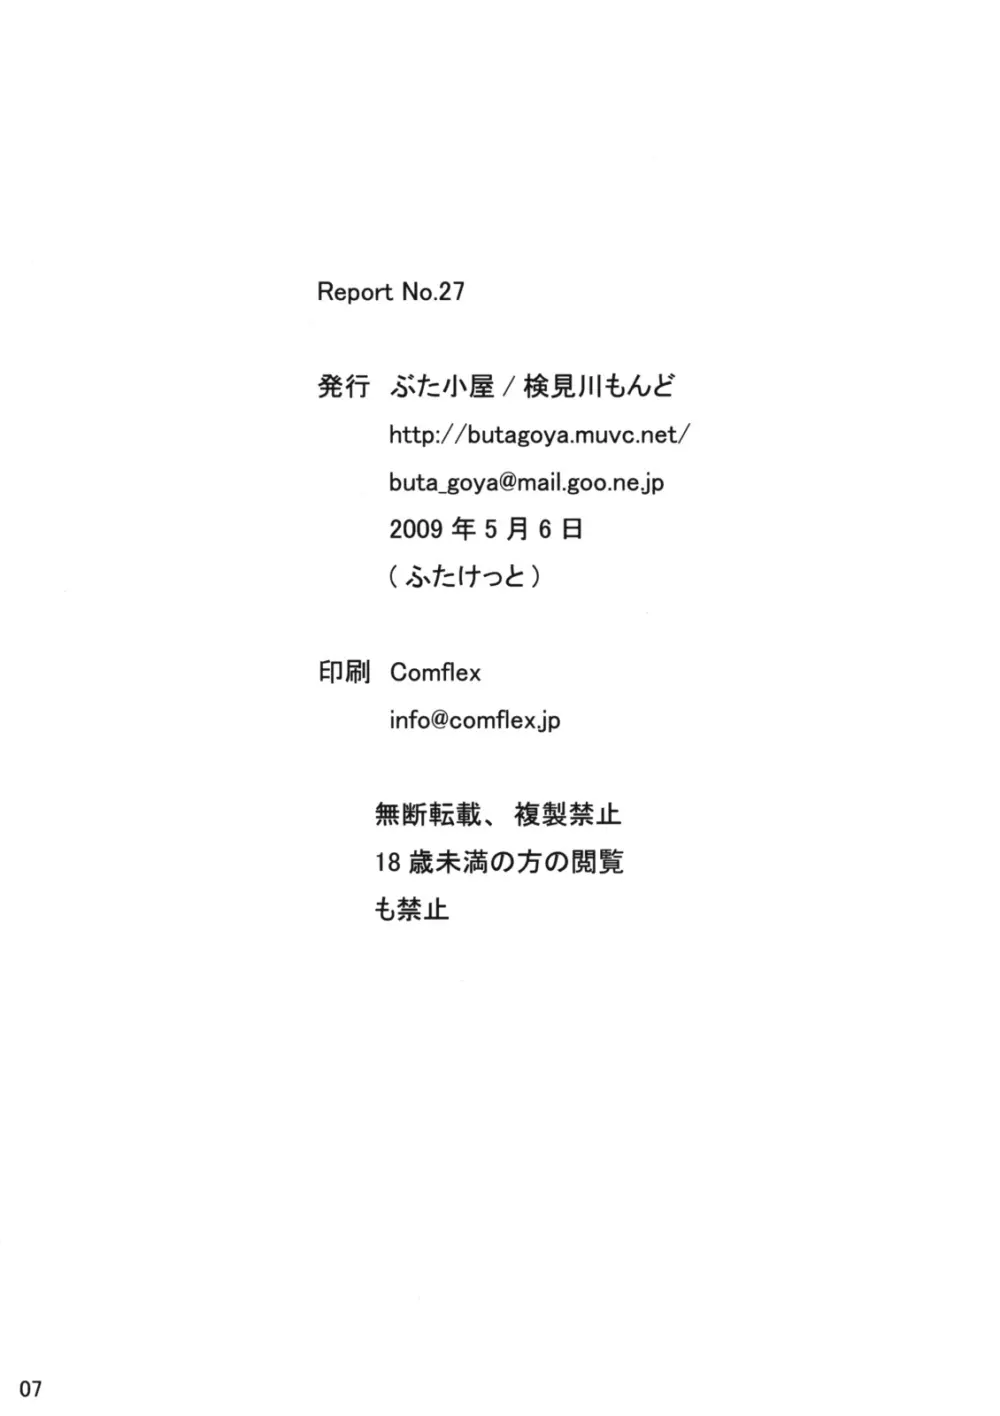 Report No.27 Page.7